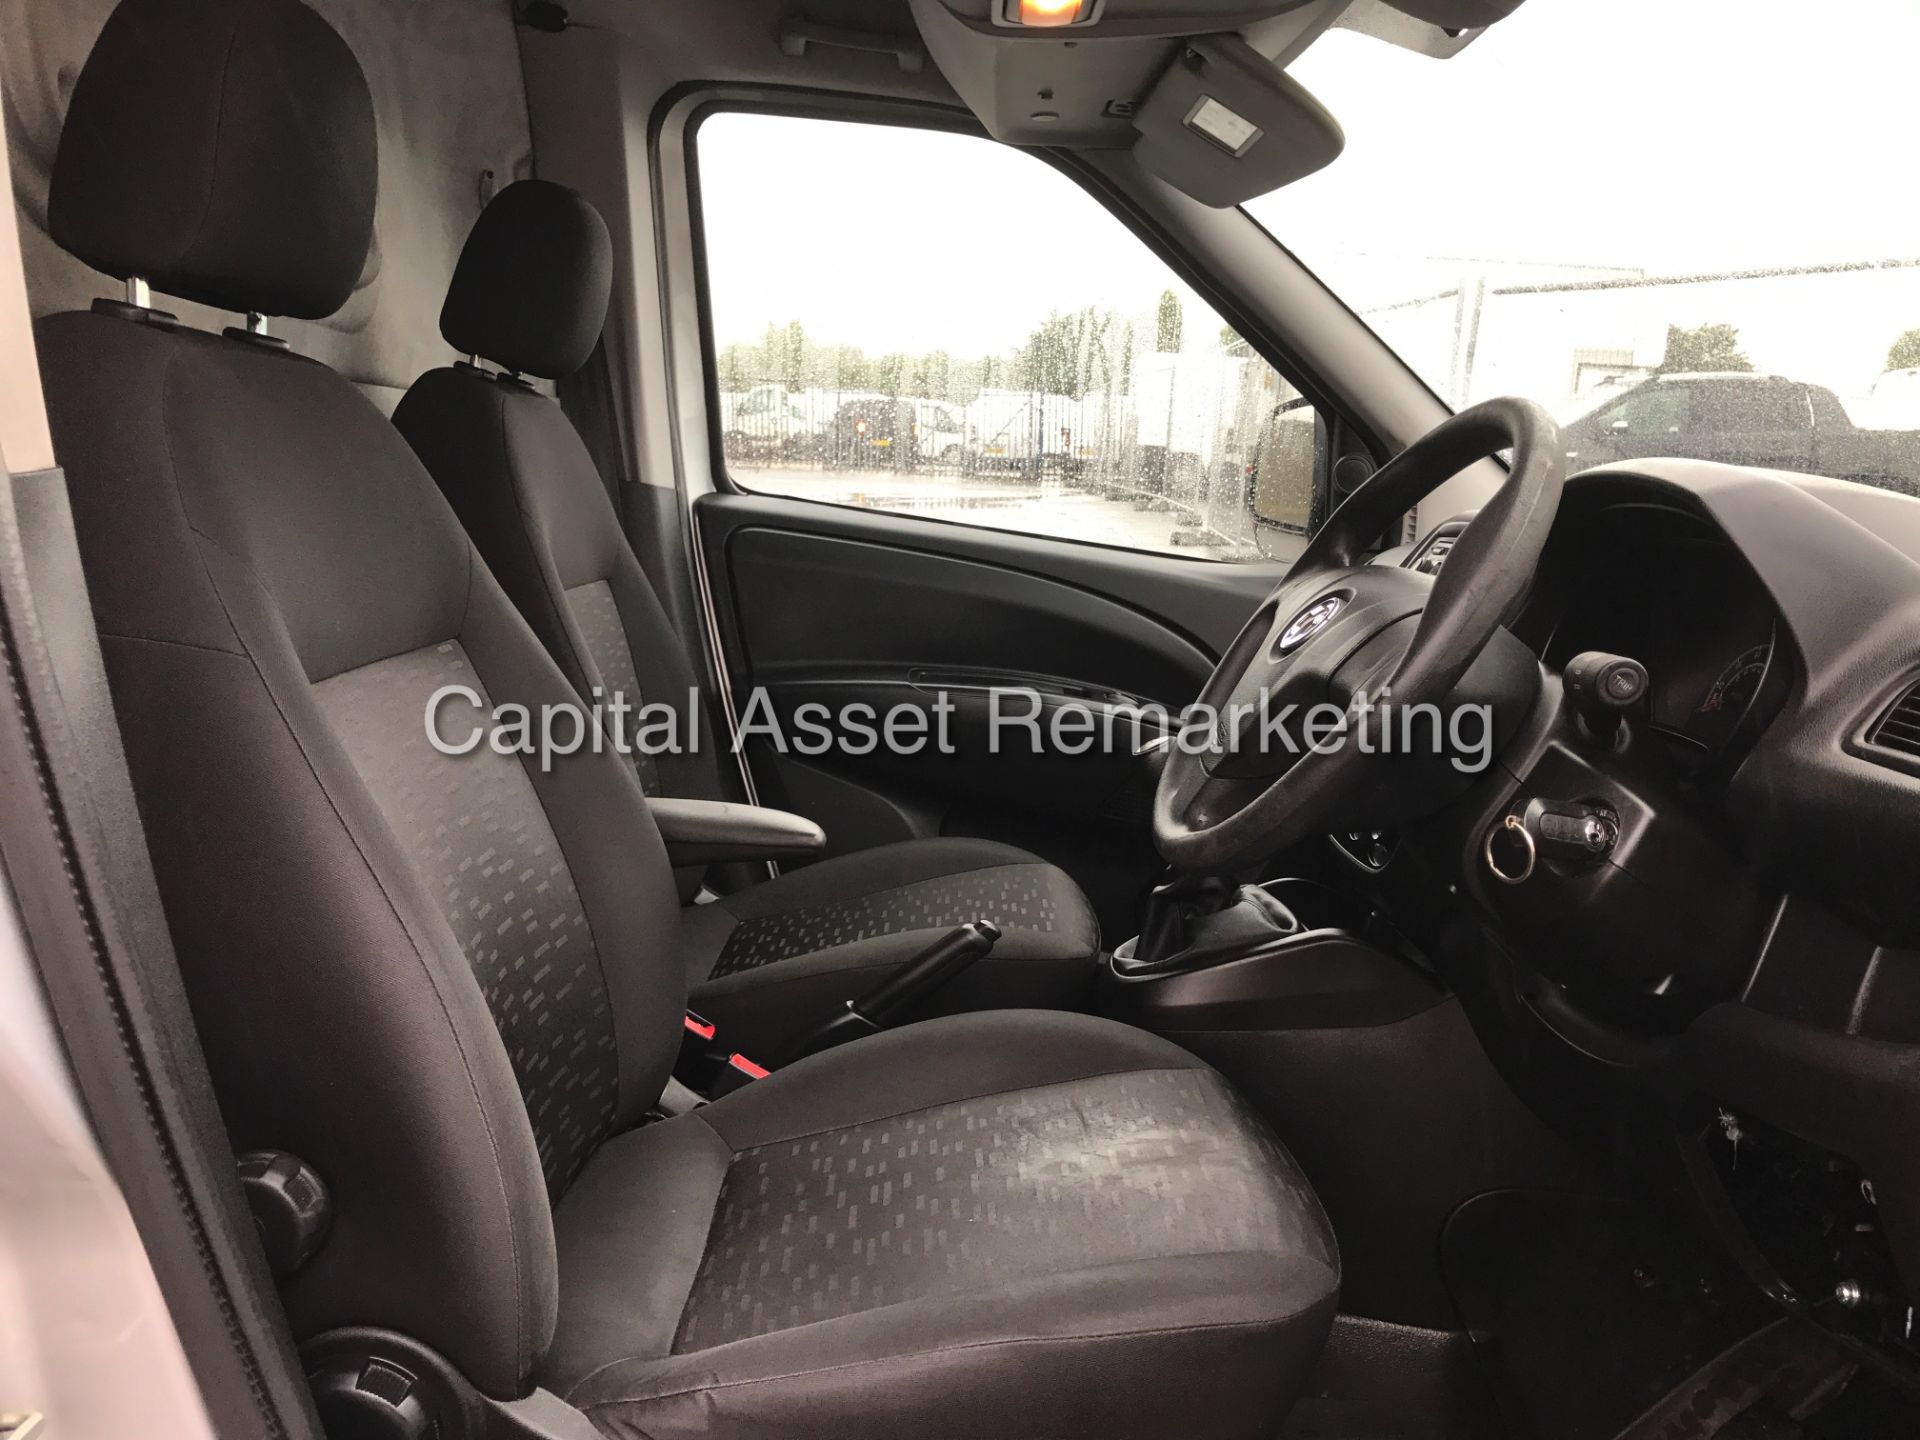 On Sale VAUXHALL COMBO 1.3CDTI "SPORTIVE - 90BHP" 1 OWNER (2013 MODEL) AIR CON - ELEC PACK - Wow!!!! - Image 9 of 15